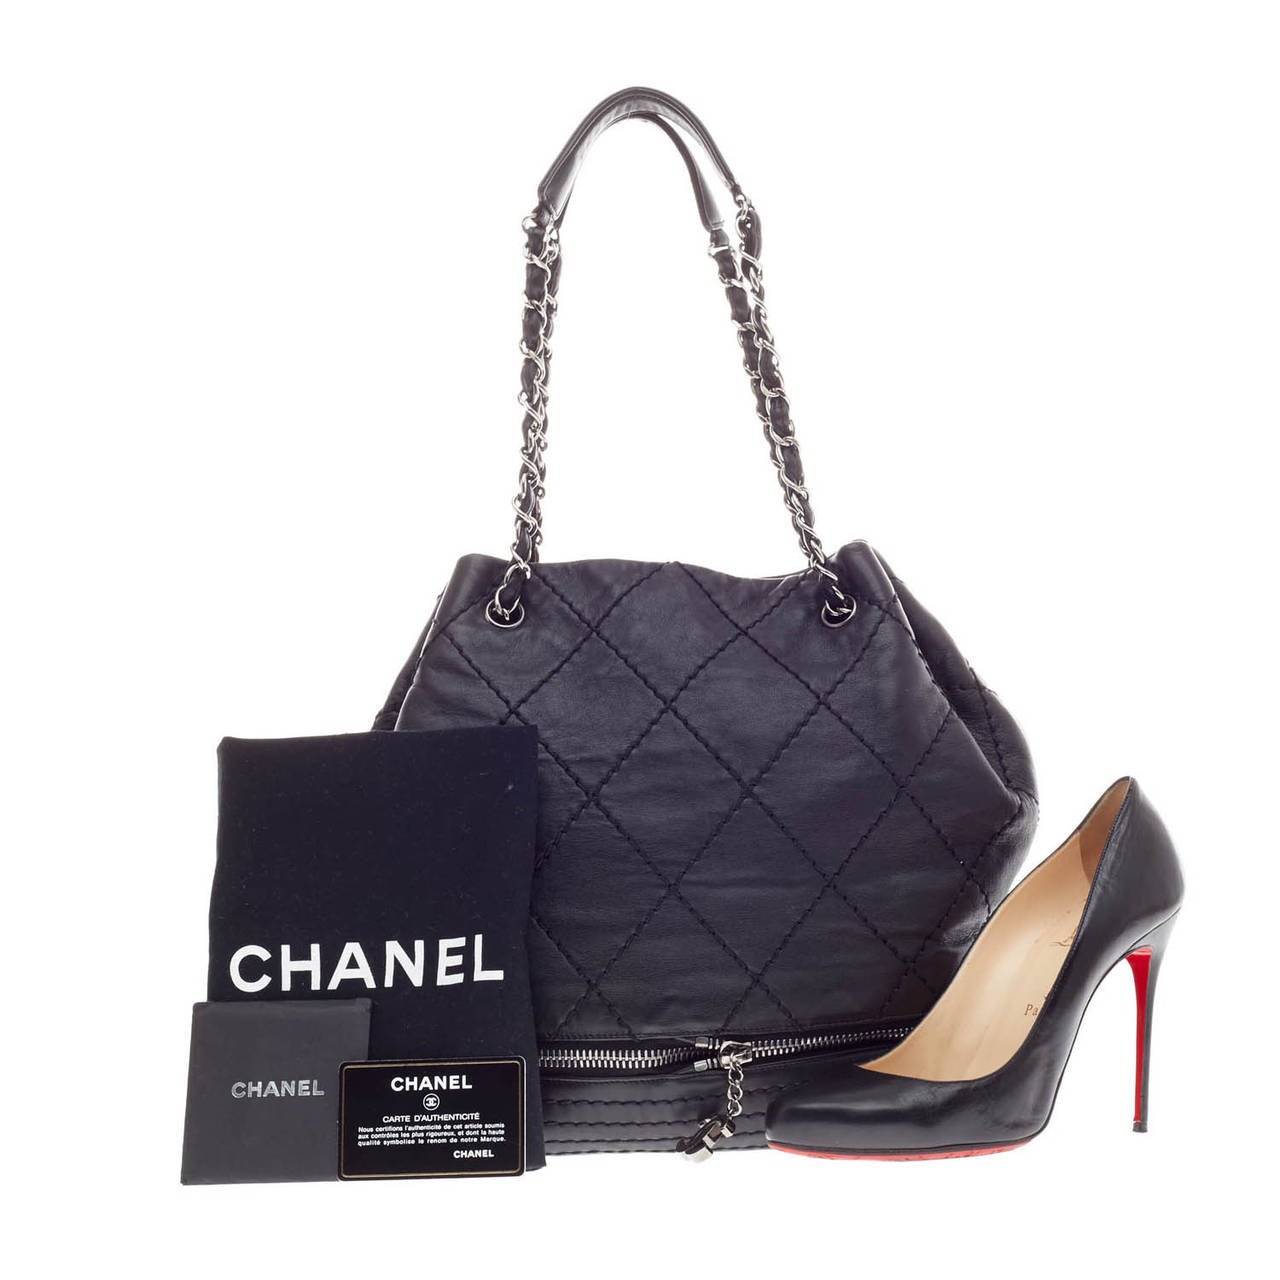 This authentic Chanel Expandable Ligne Bucket Quilted Stitched Leather size Large showcases practicality and luxury with the Chanel CC logo zipper opening to expand the height of the bag by two inches. This black bucket bag in diamond quilt